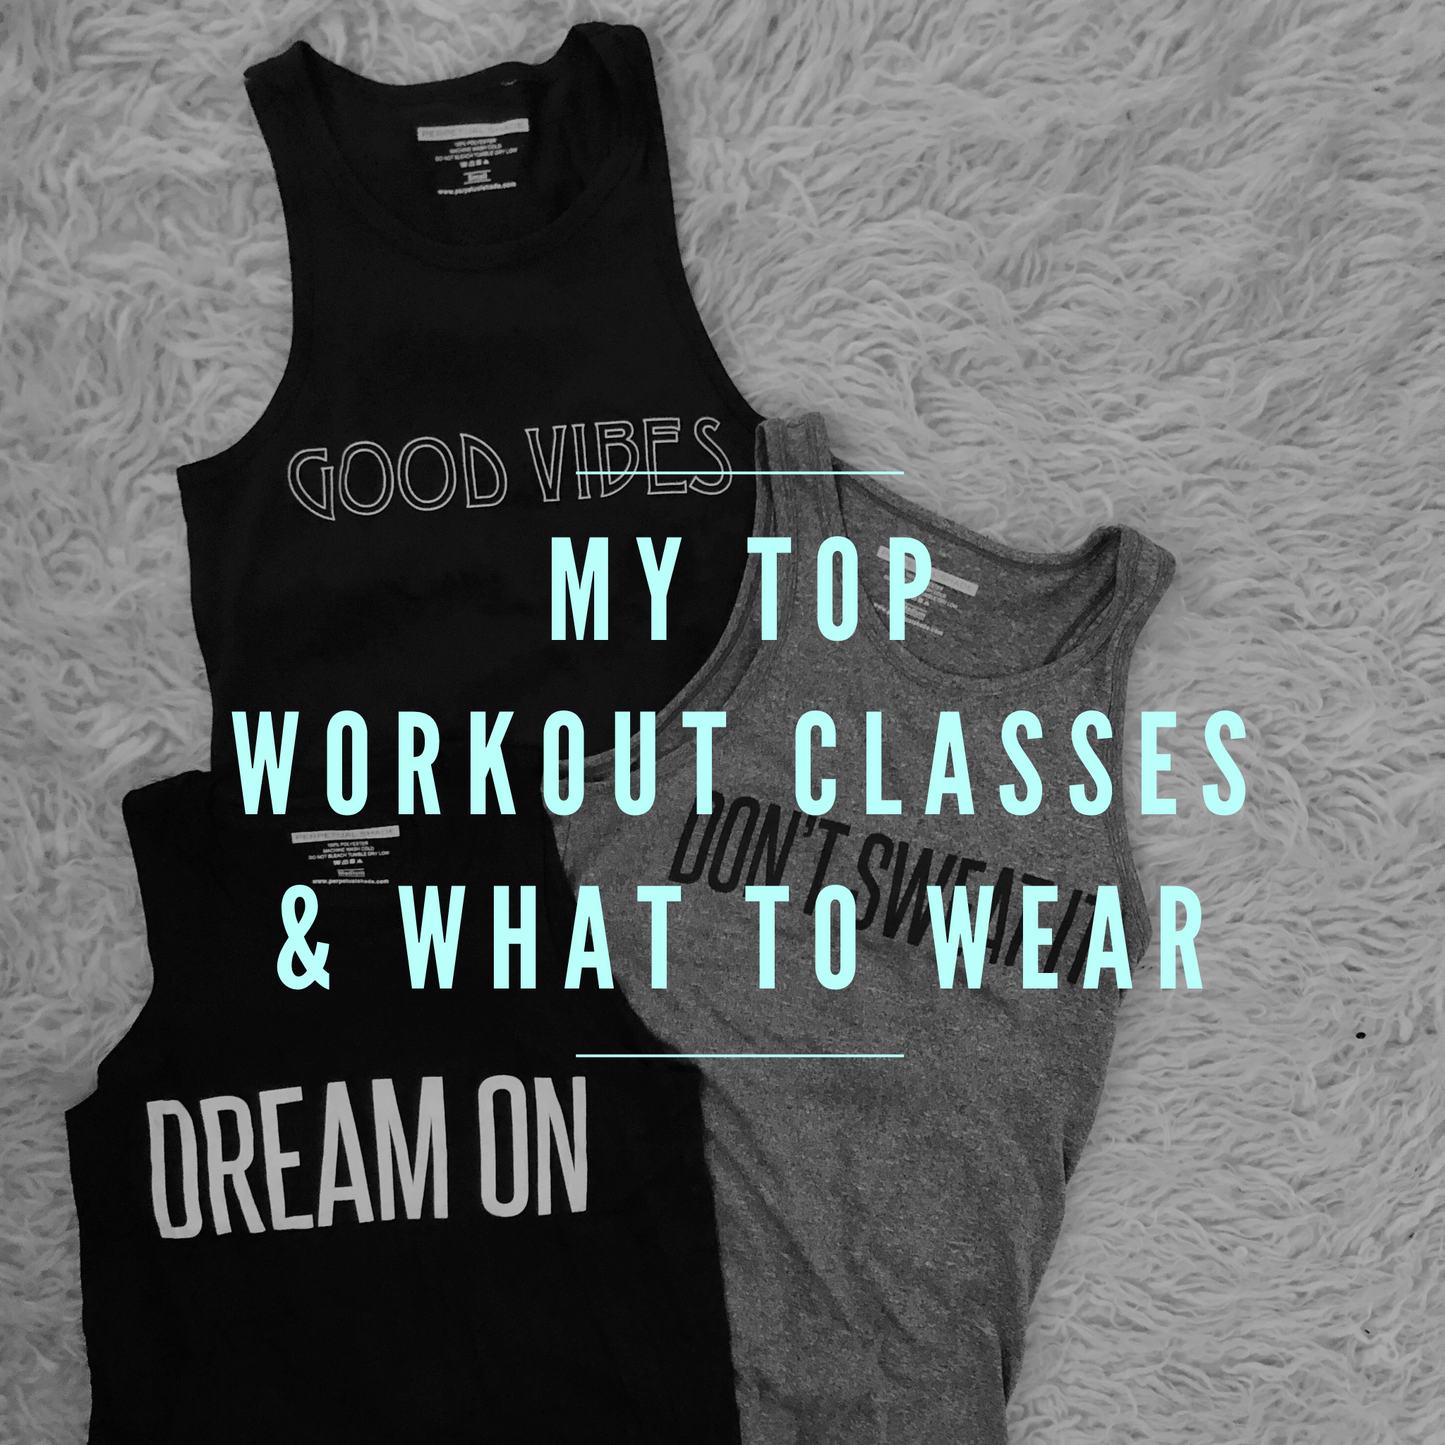 My Top Workout Classes & What To Wear